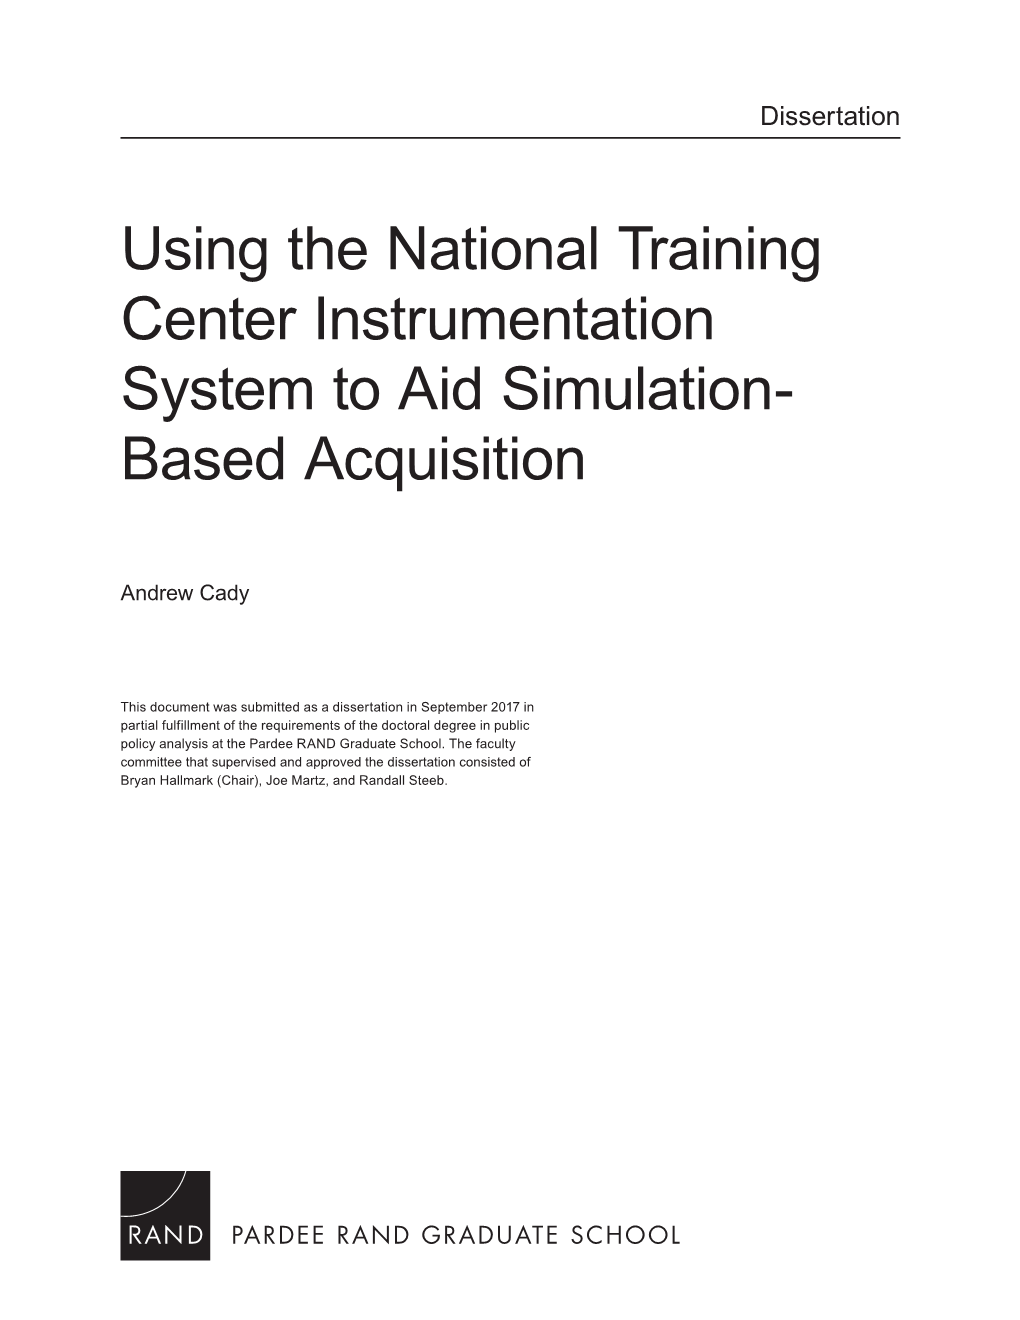 Using the National Training Center Instrumentation System to Aid Simulation- Based Acquisition